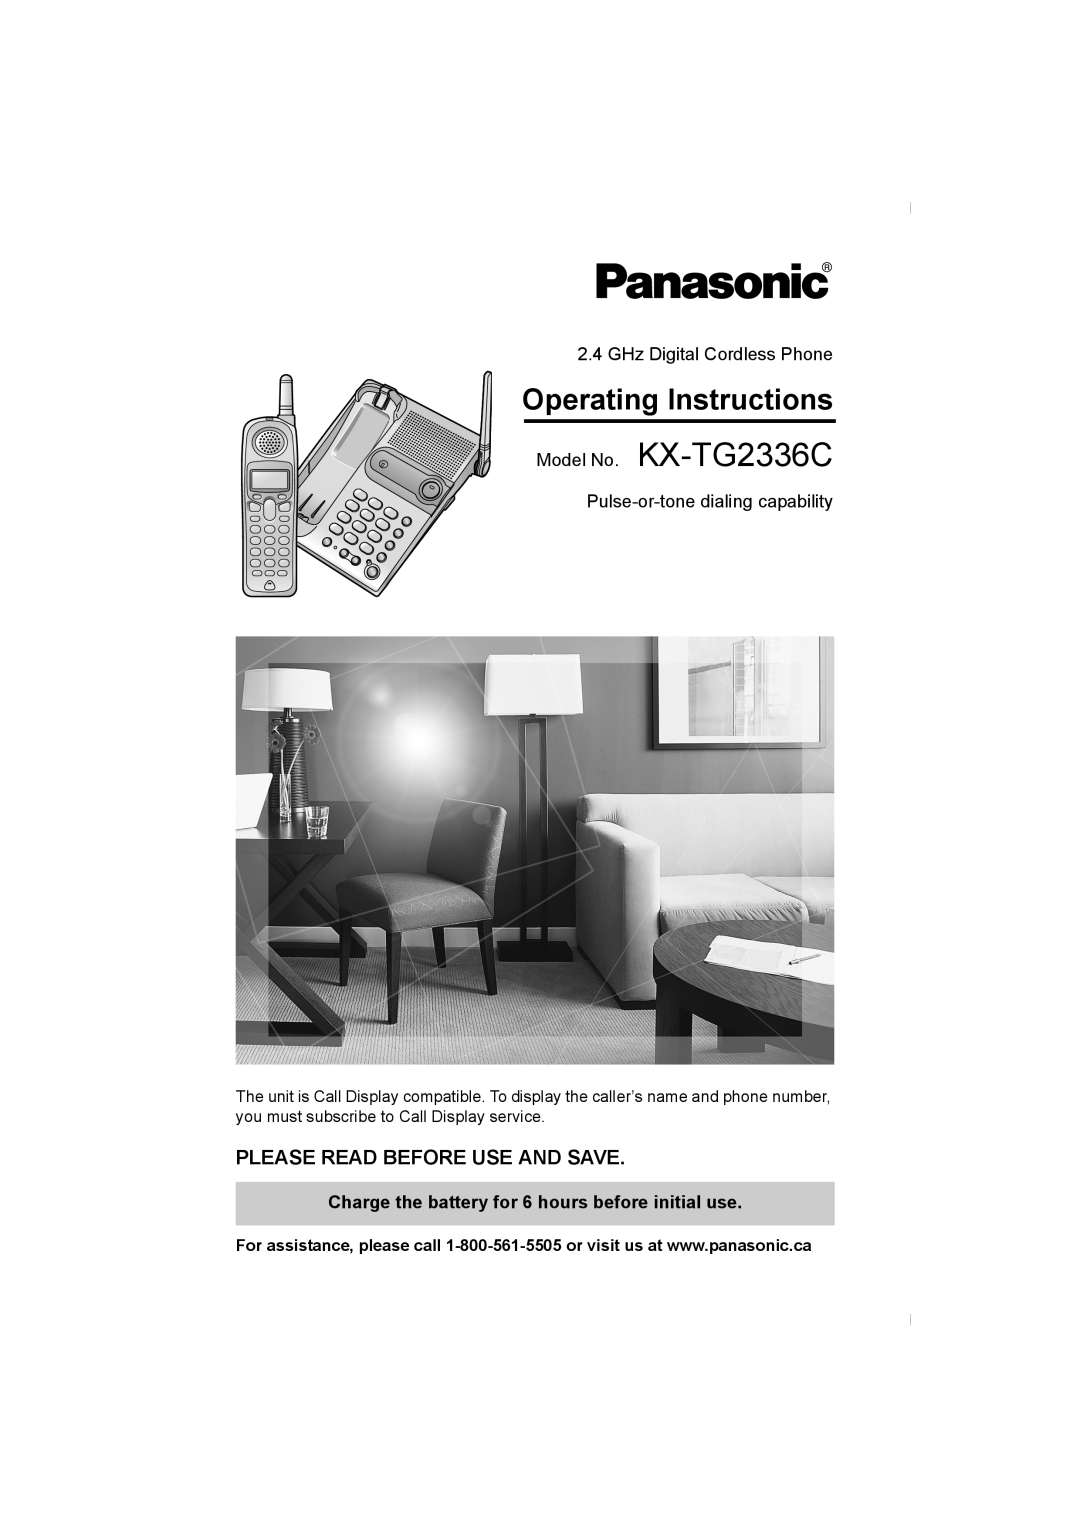 Panasonic KX-TG2336C operating instructions Operating Instructions, Please Read Before Use And Save 